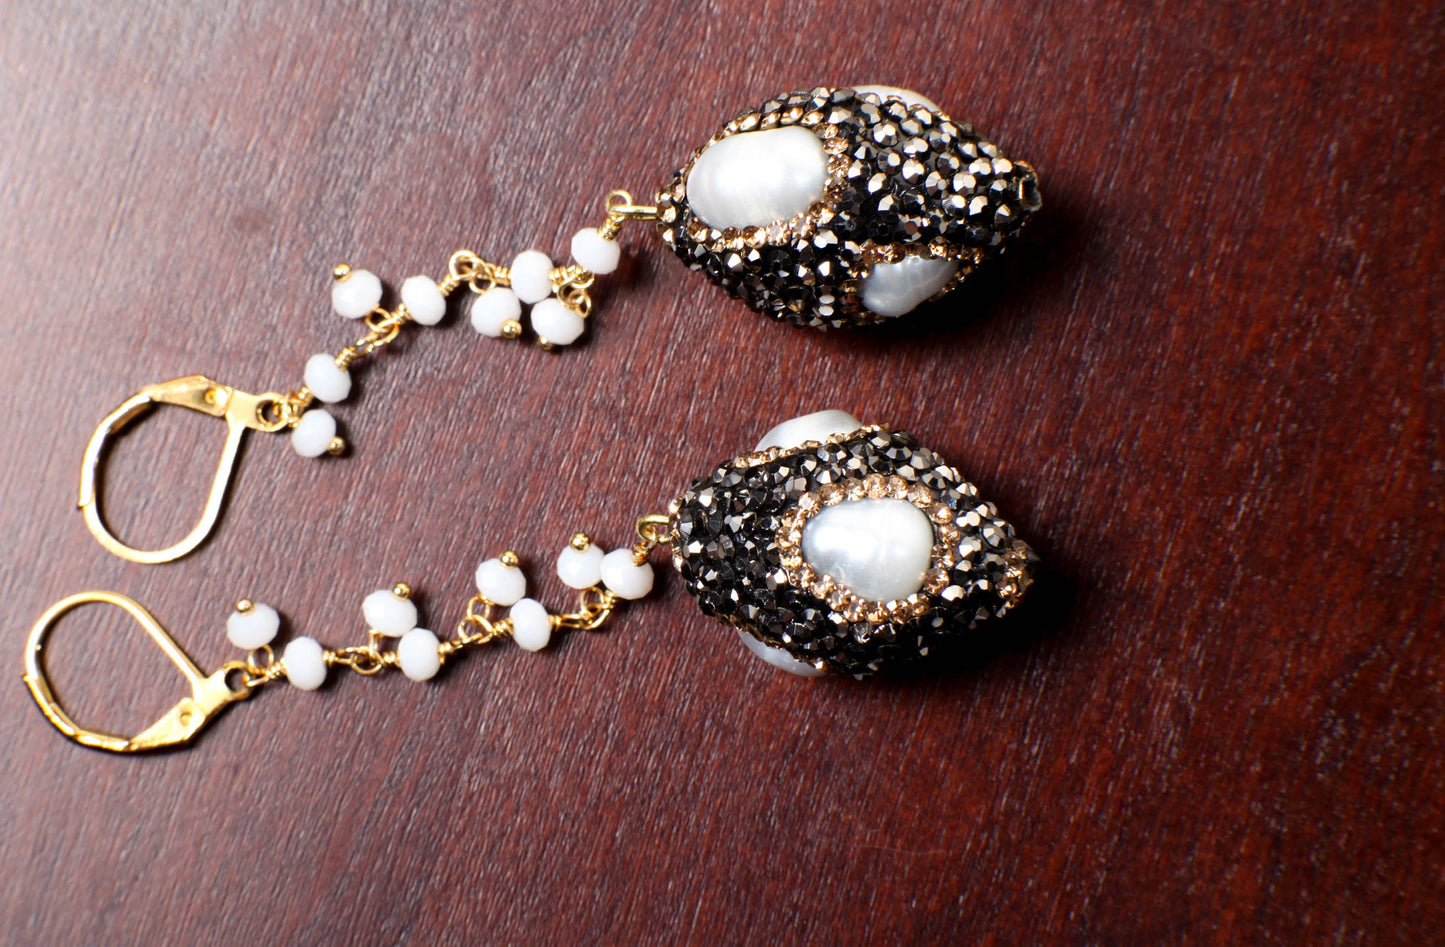 Genuine Freshwater Baroque Pearl, Rhinestone Crystal Inlaid Pave with Dangling Wire Wrapped Crystal Beaded Leverback Earrings Gift For Her